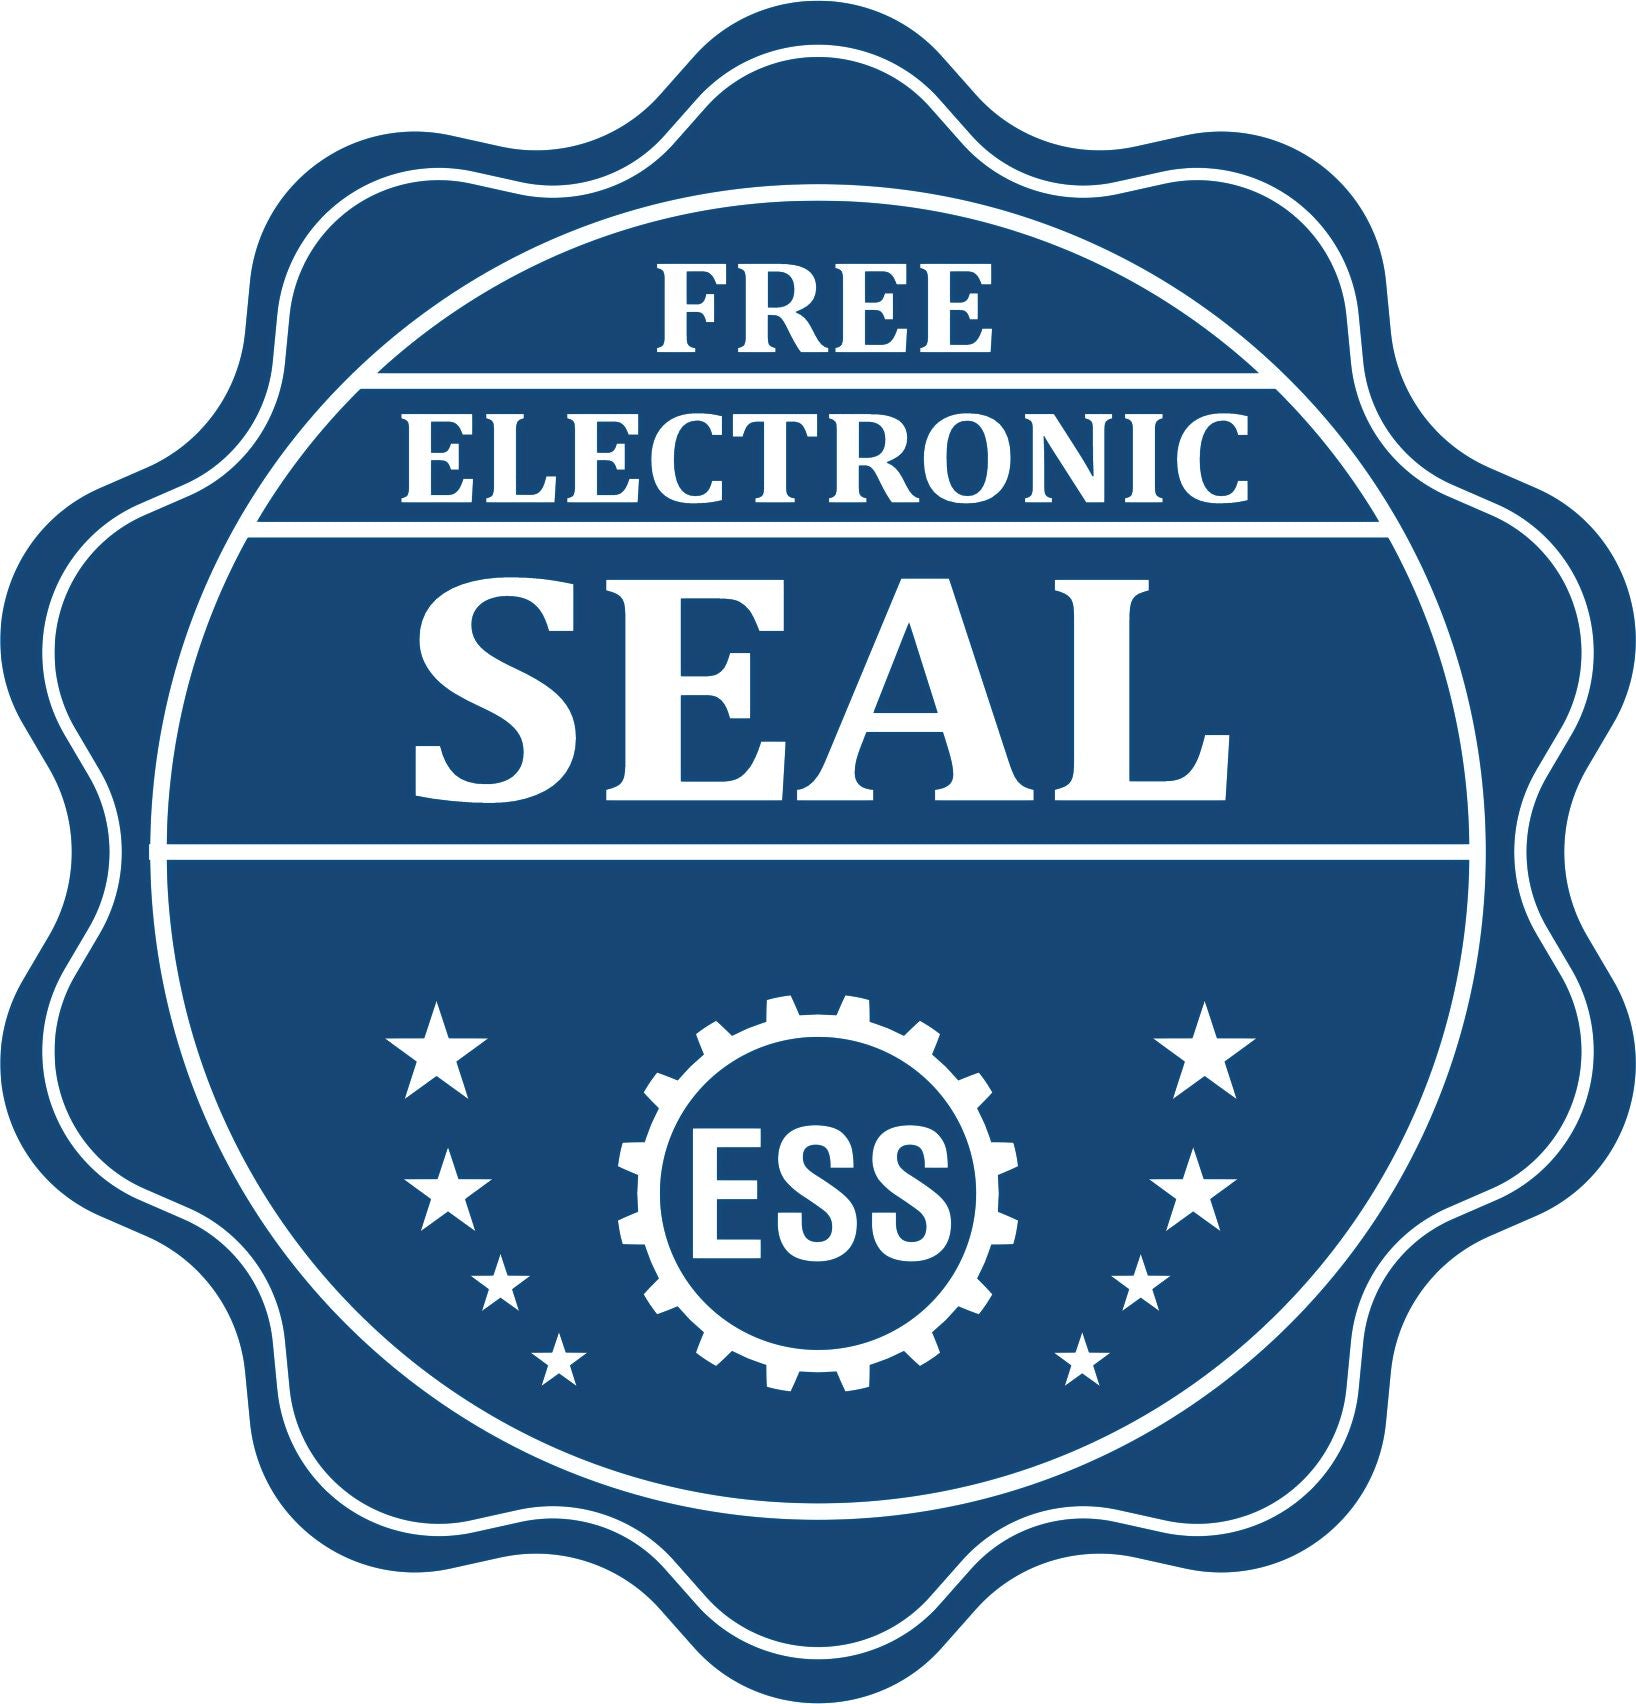 A badge showing a free electronic seal for the Long Reach Mississippi Land Surveyor Seal with stars and the ESS gear on the emblem.